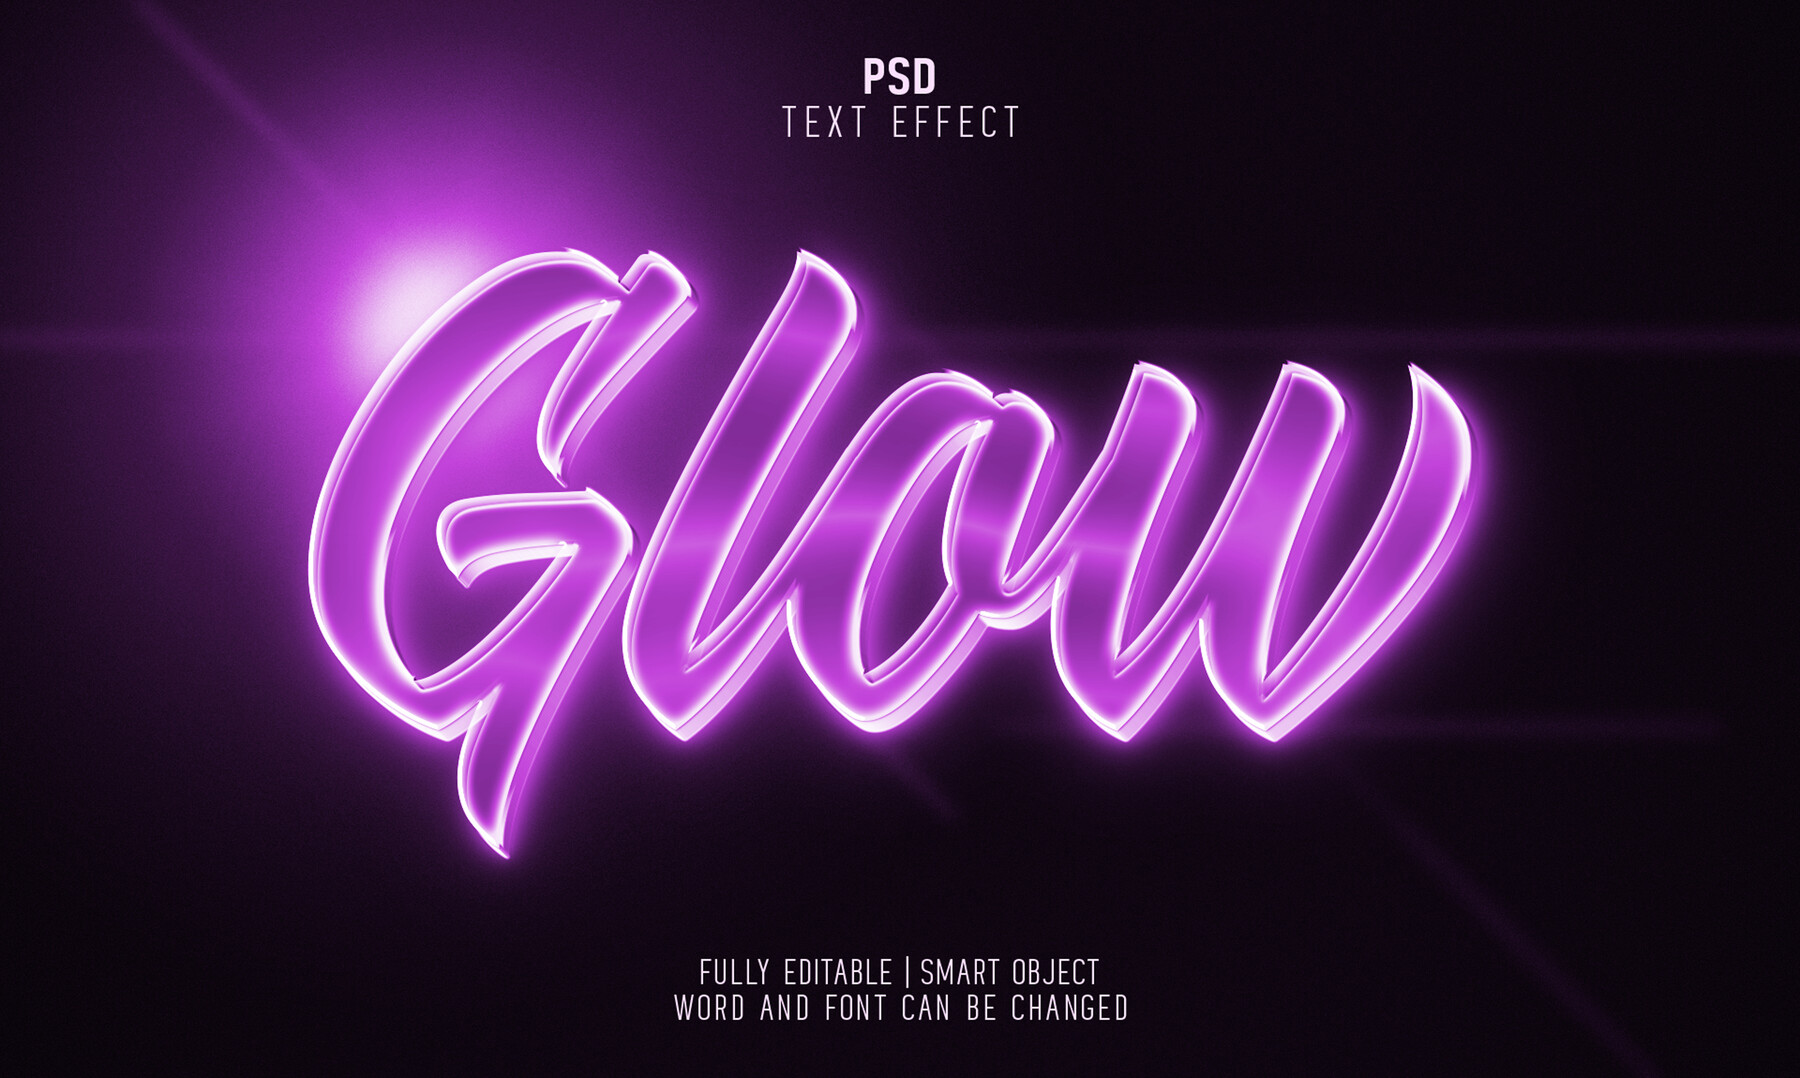 ArtStation - Glow PSD fully editable text effect. Layer style PSD ...